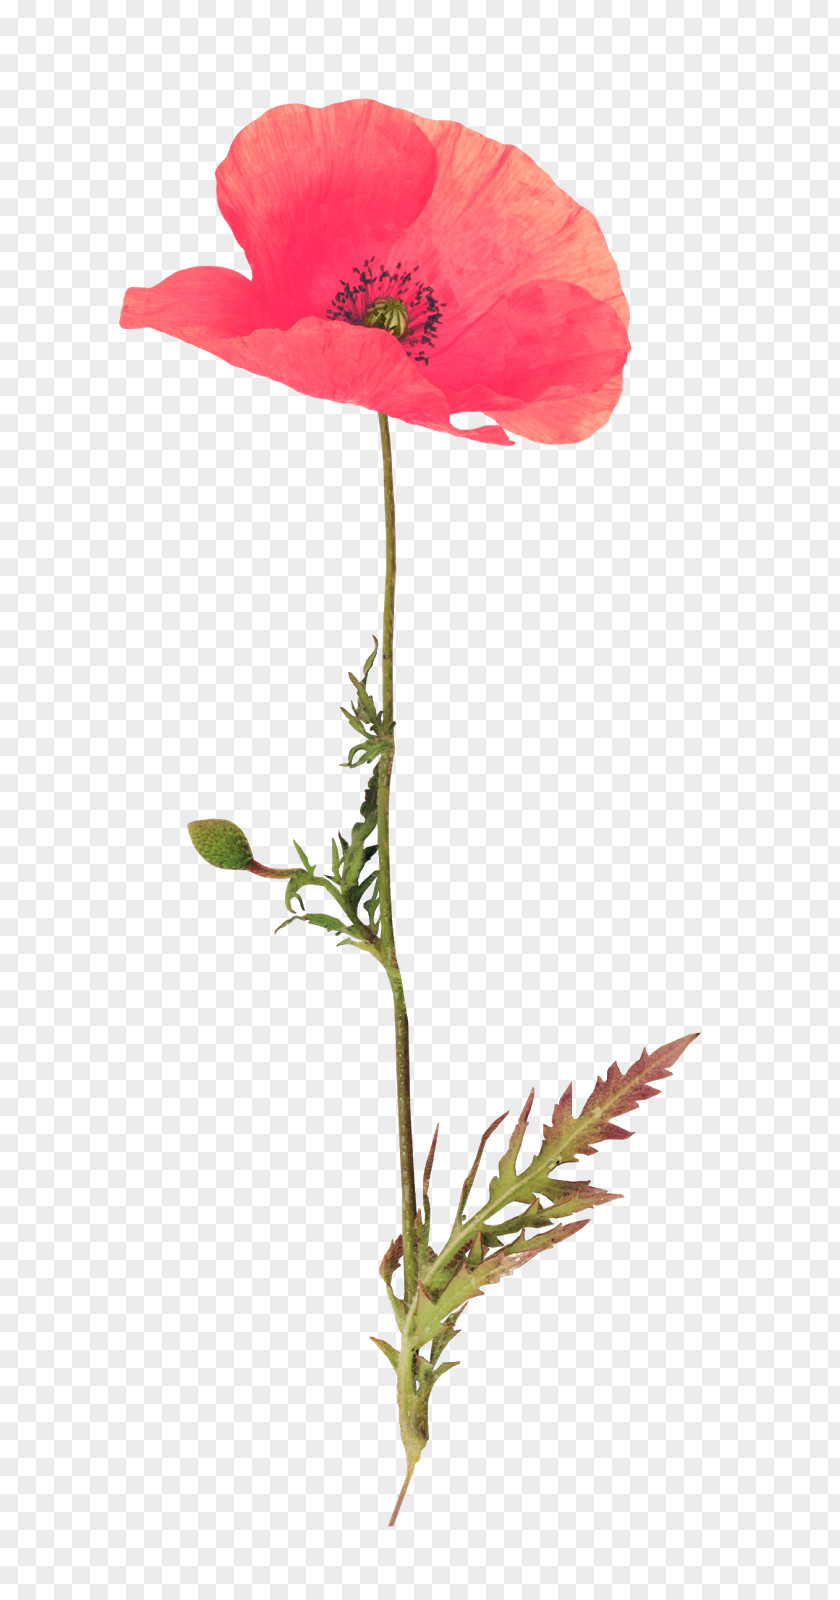 Poppy Red RGB Color Model Adobe Photoshop PNG